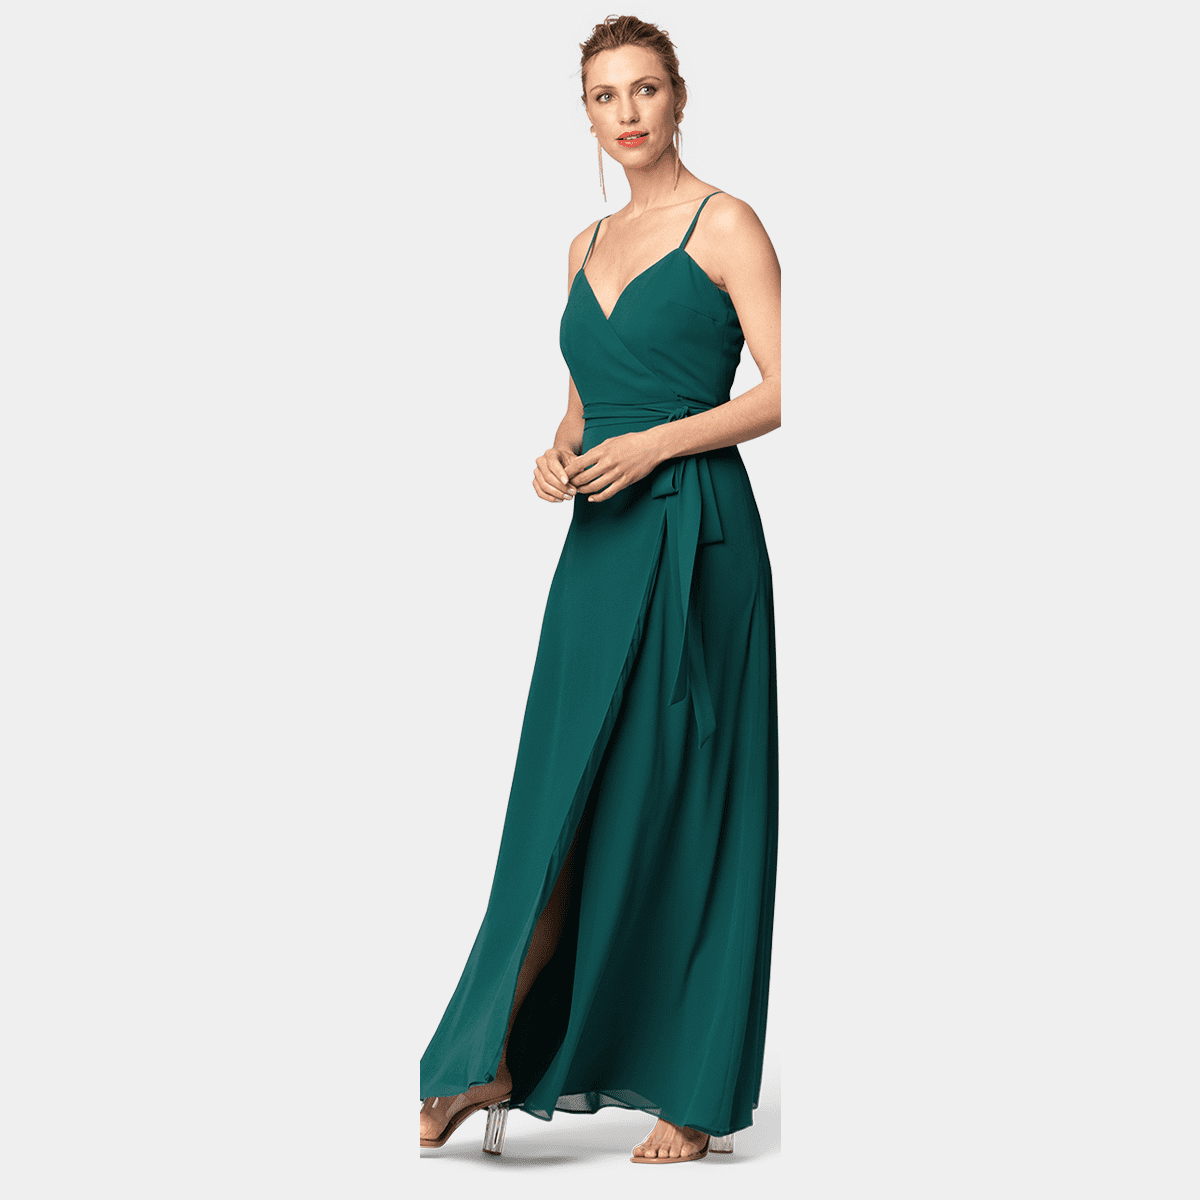 Wedding Guest Dresses  Made to Measure Dresses - Sumissura